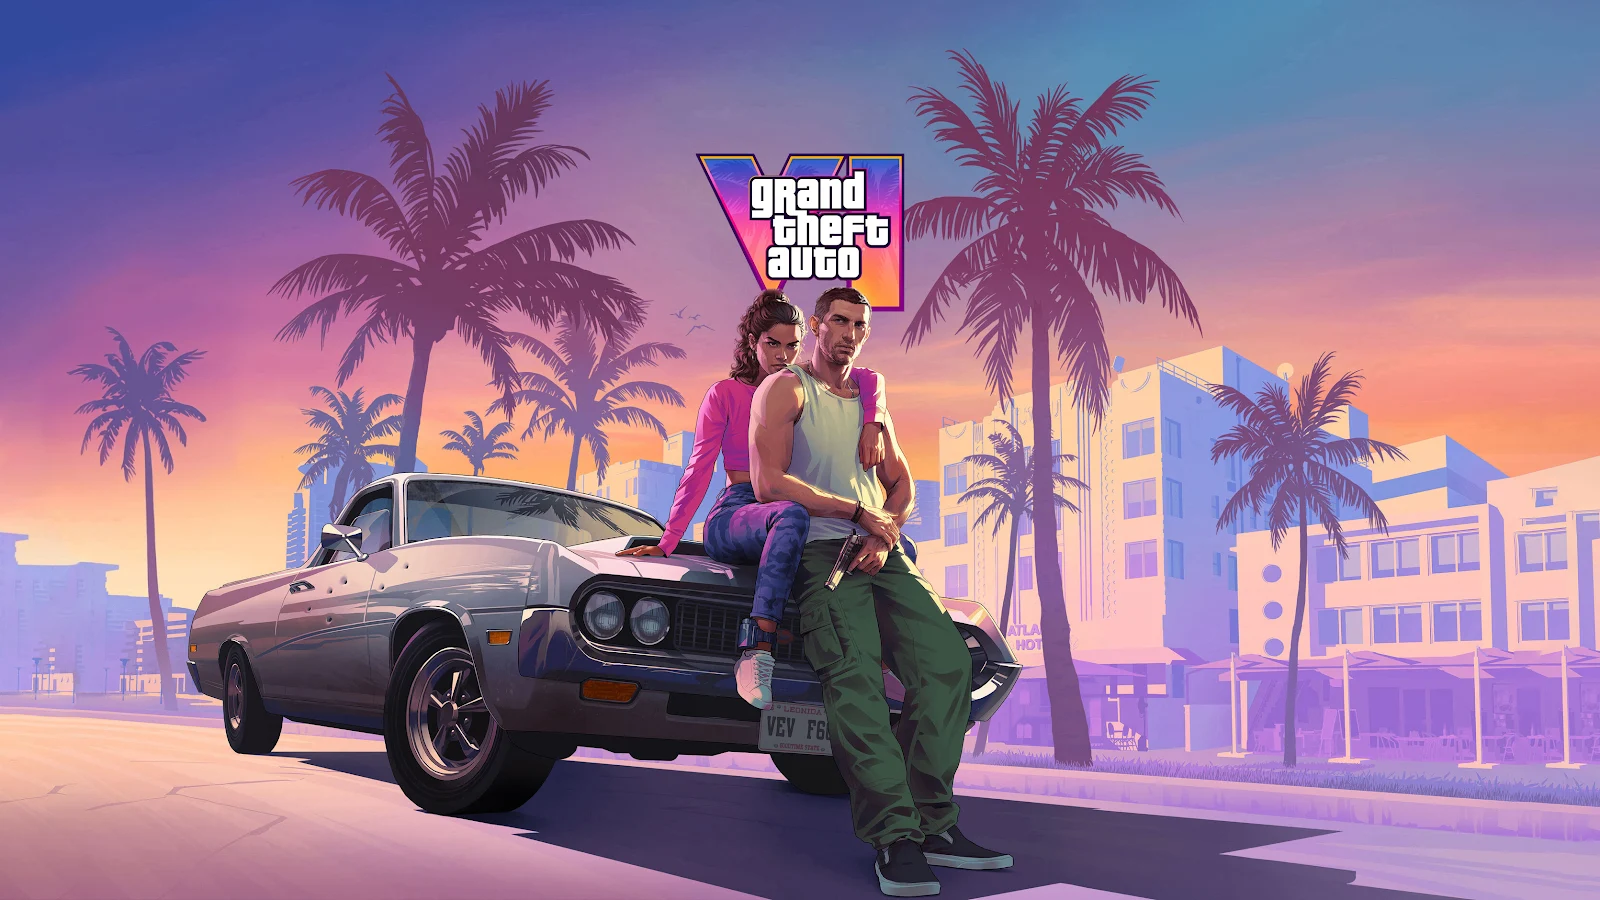 A Cool Grand Theft Auto VI, GTA 6, Official, Trailer 2K Wallpaper for Free Download in High Quality [3342x1880]